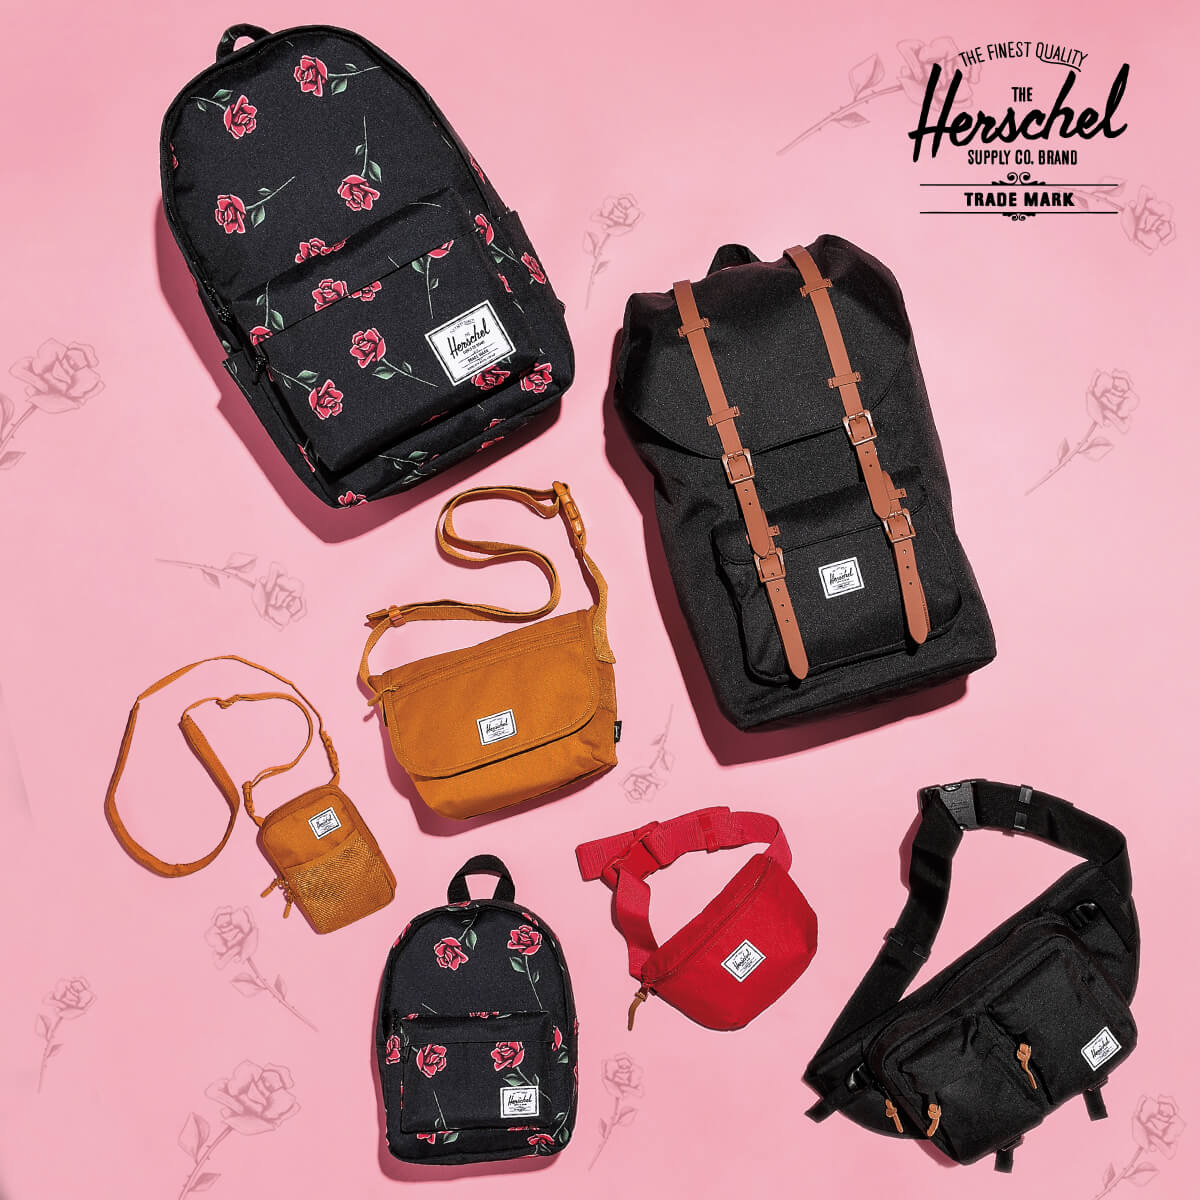 NEW ARRIVAL BAGS FROM HERSCHEL AND MORE - SHOP NOW